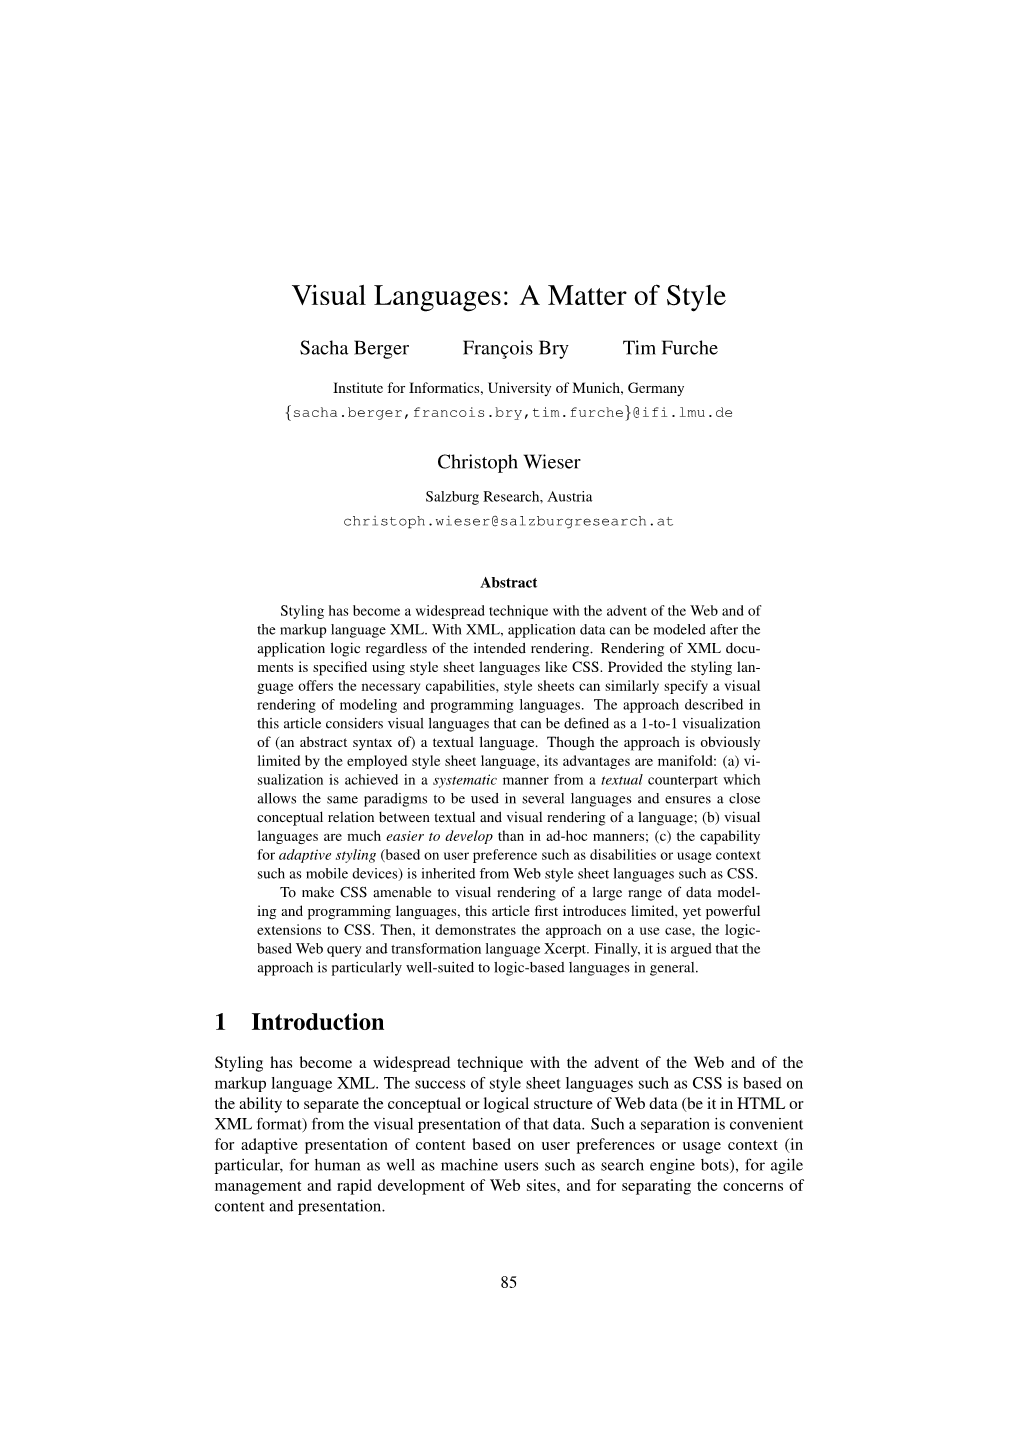 Visual Languages: a Matter of Style